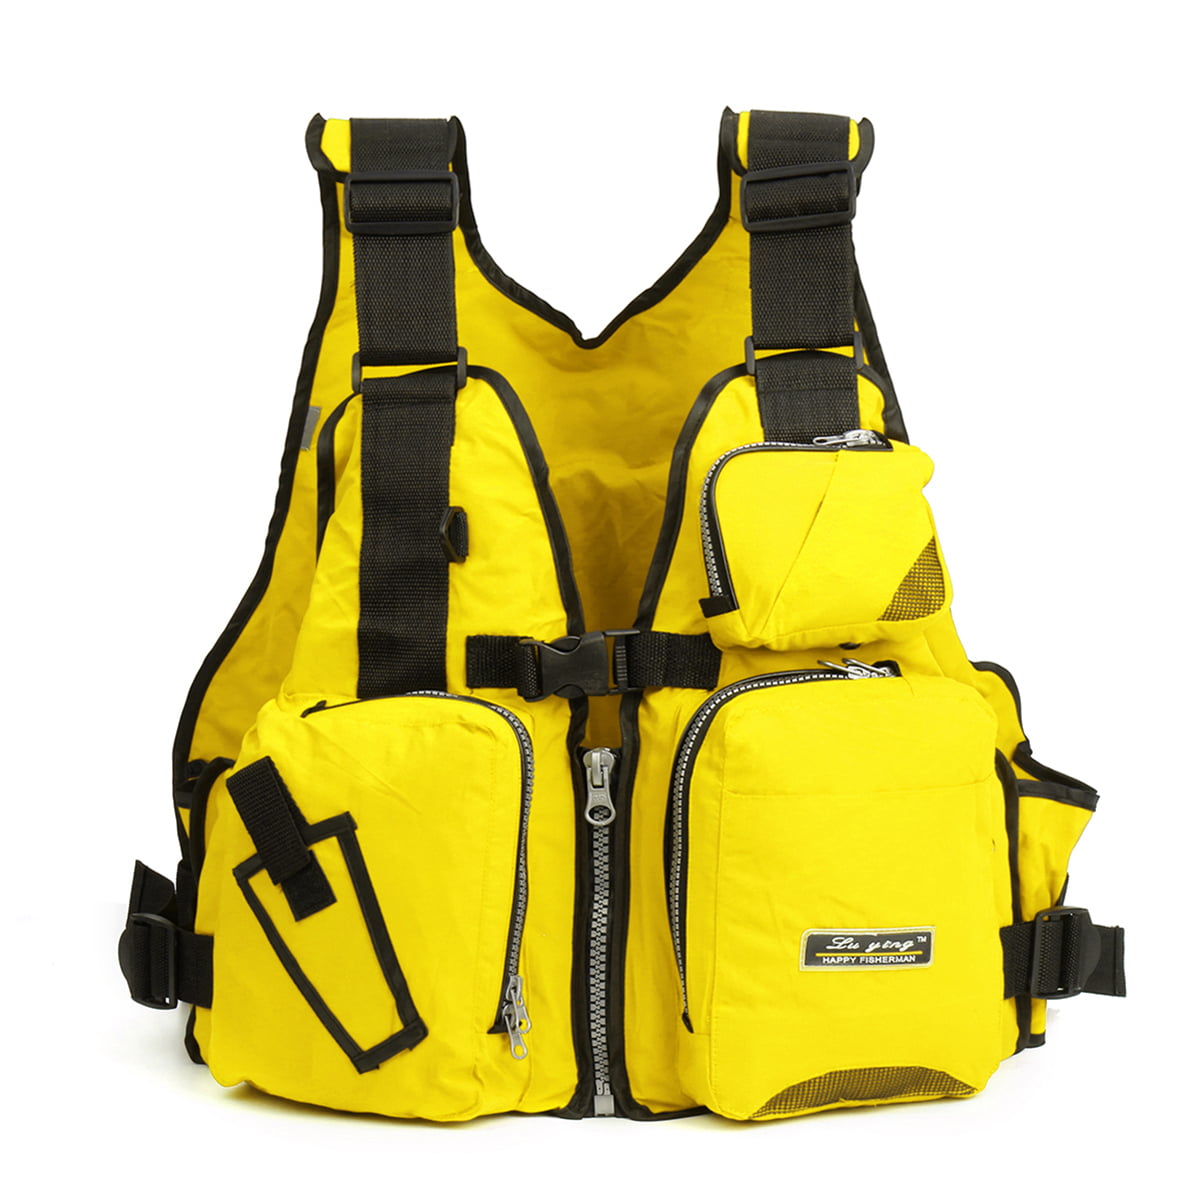 Stearns 354751 Adult Classic Life Vest Universal Blue for sale online 